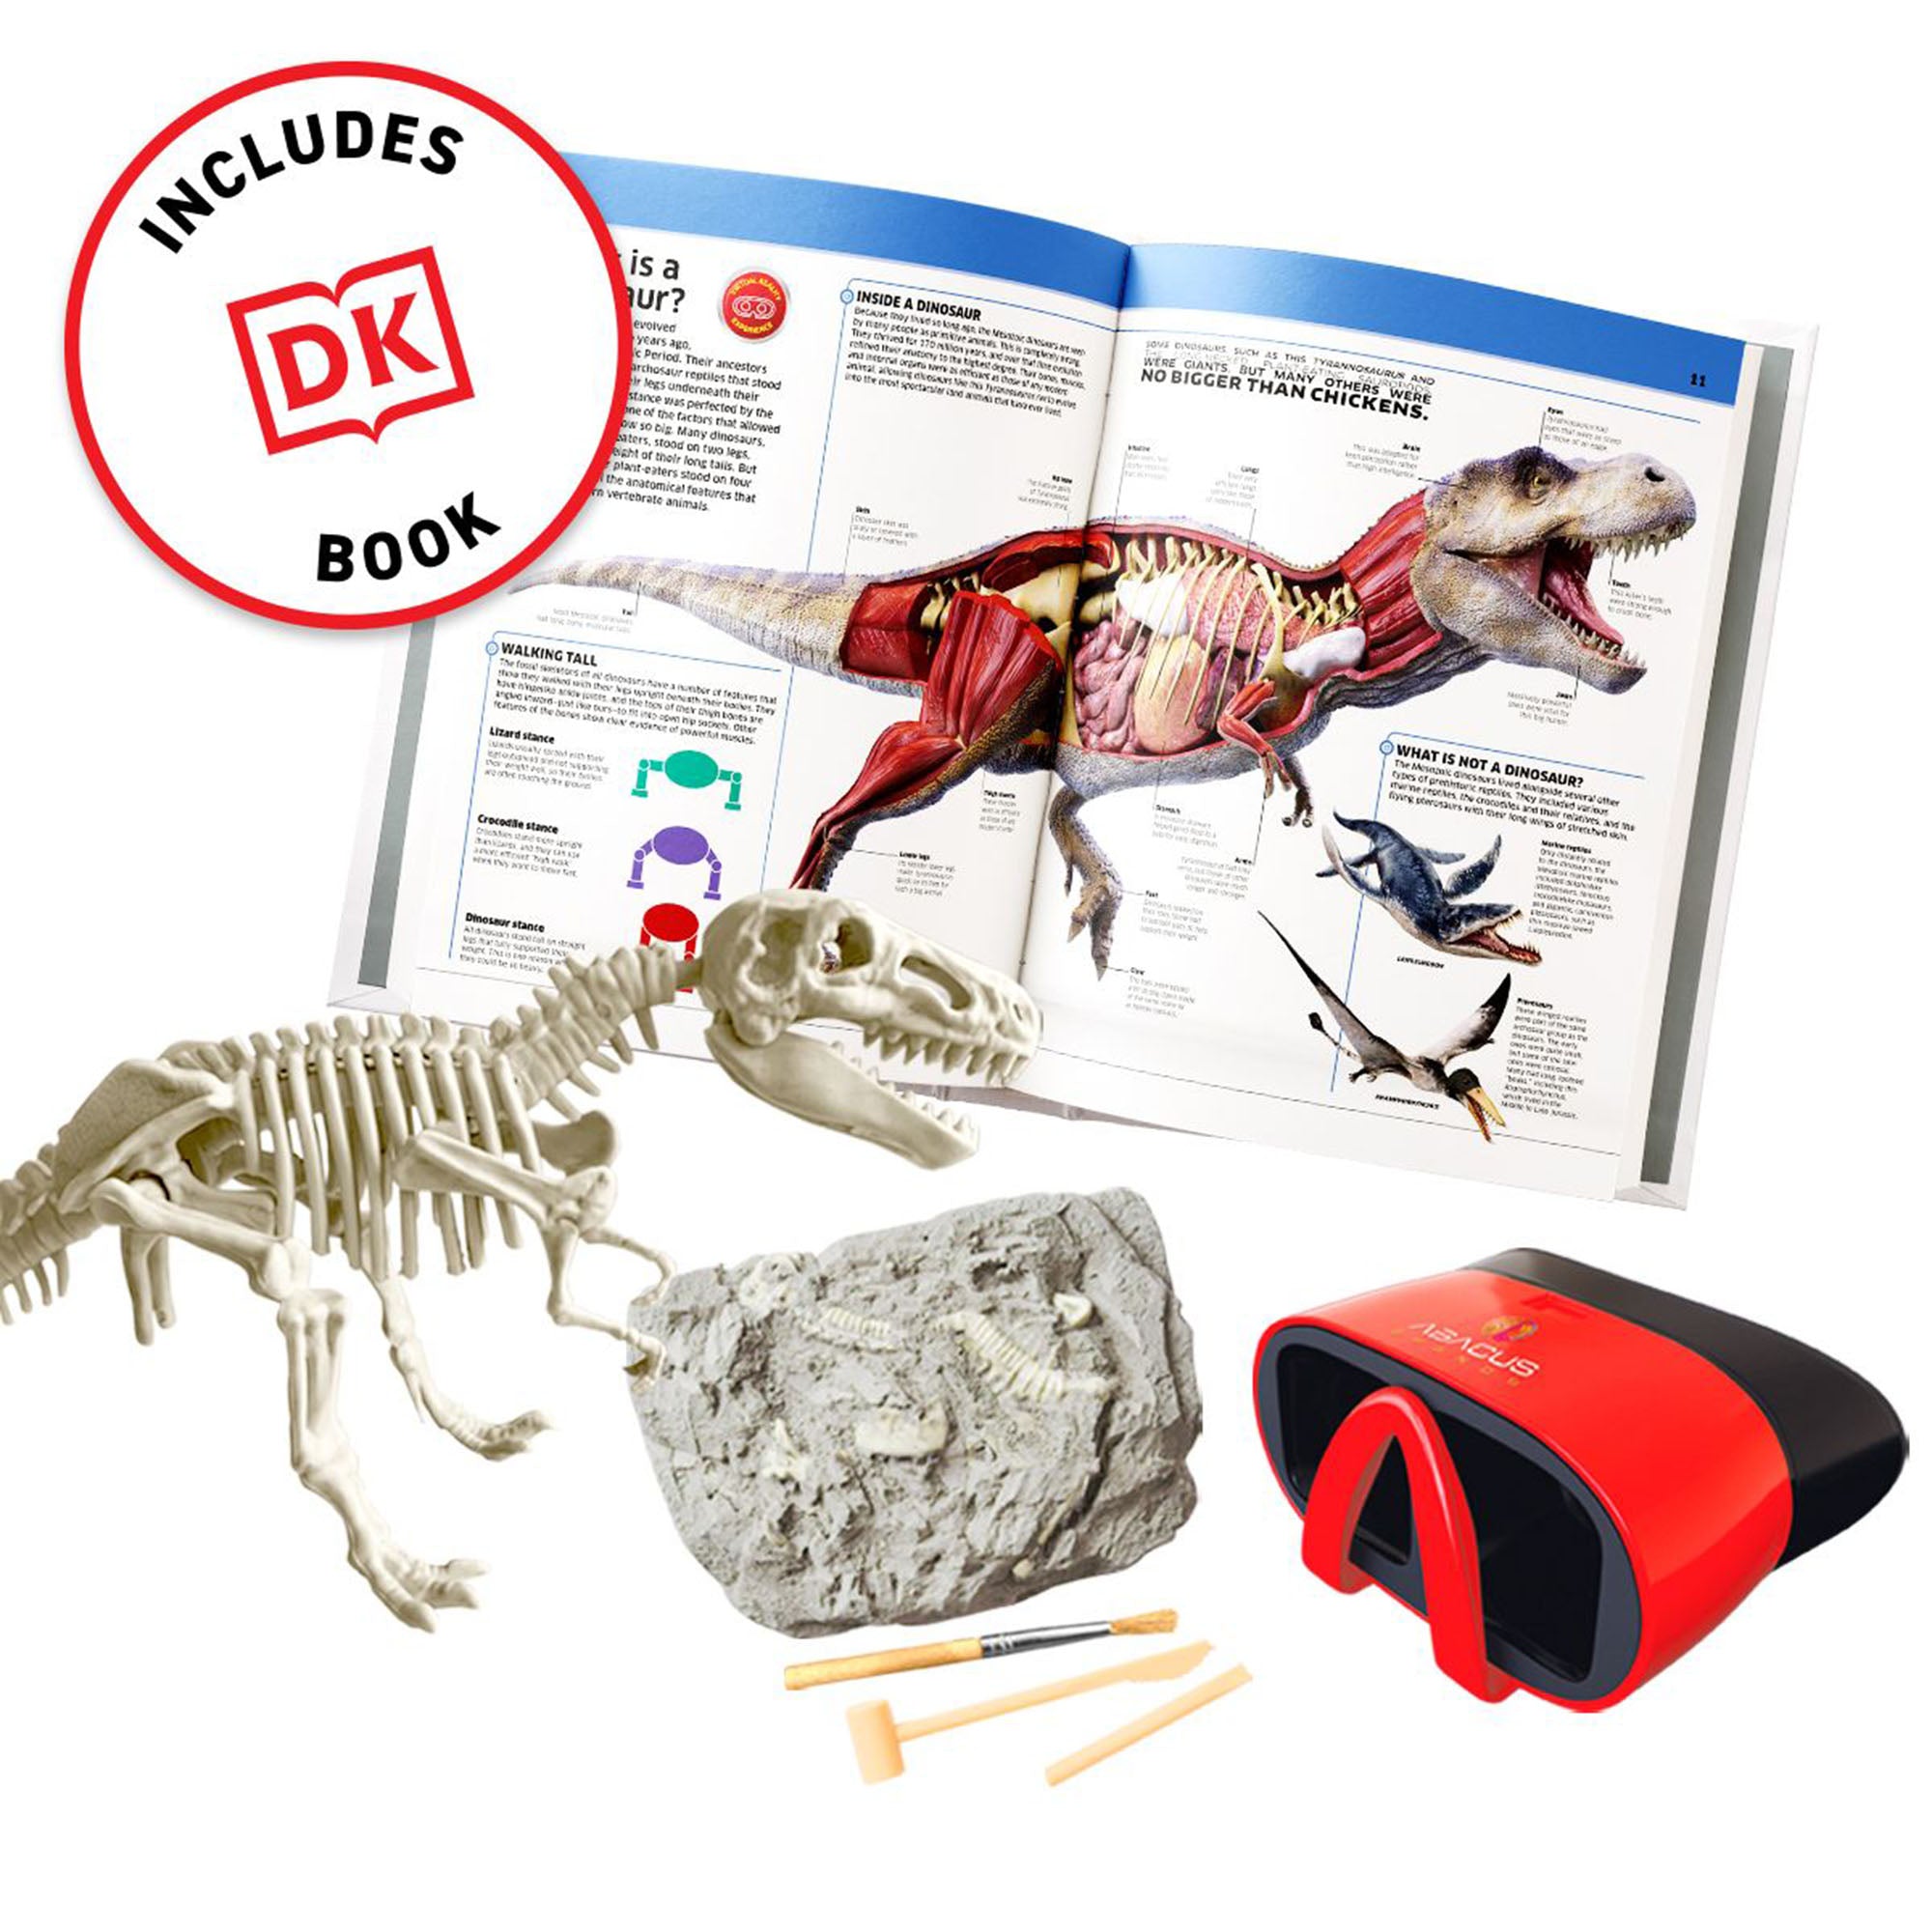 ABACUS BRAND'S VIRTUAL REALITY DINOSAURS! DISCOVER BOX GIFT SET